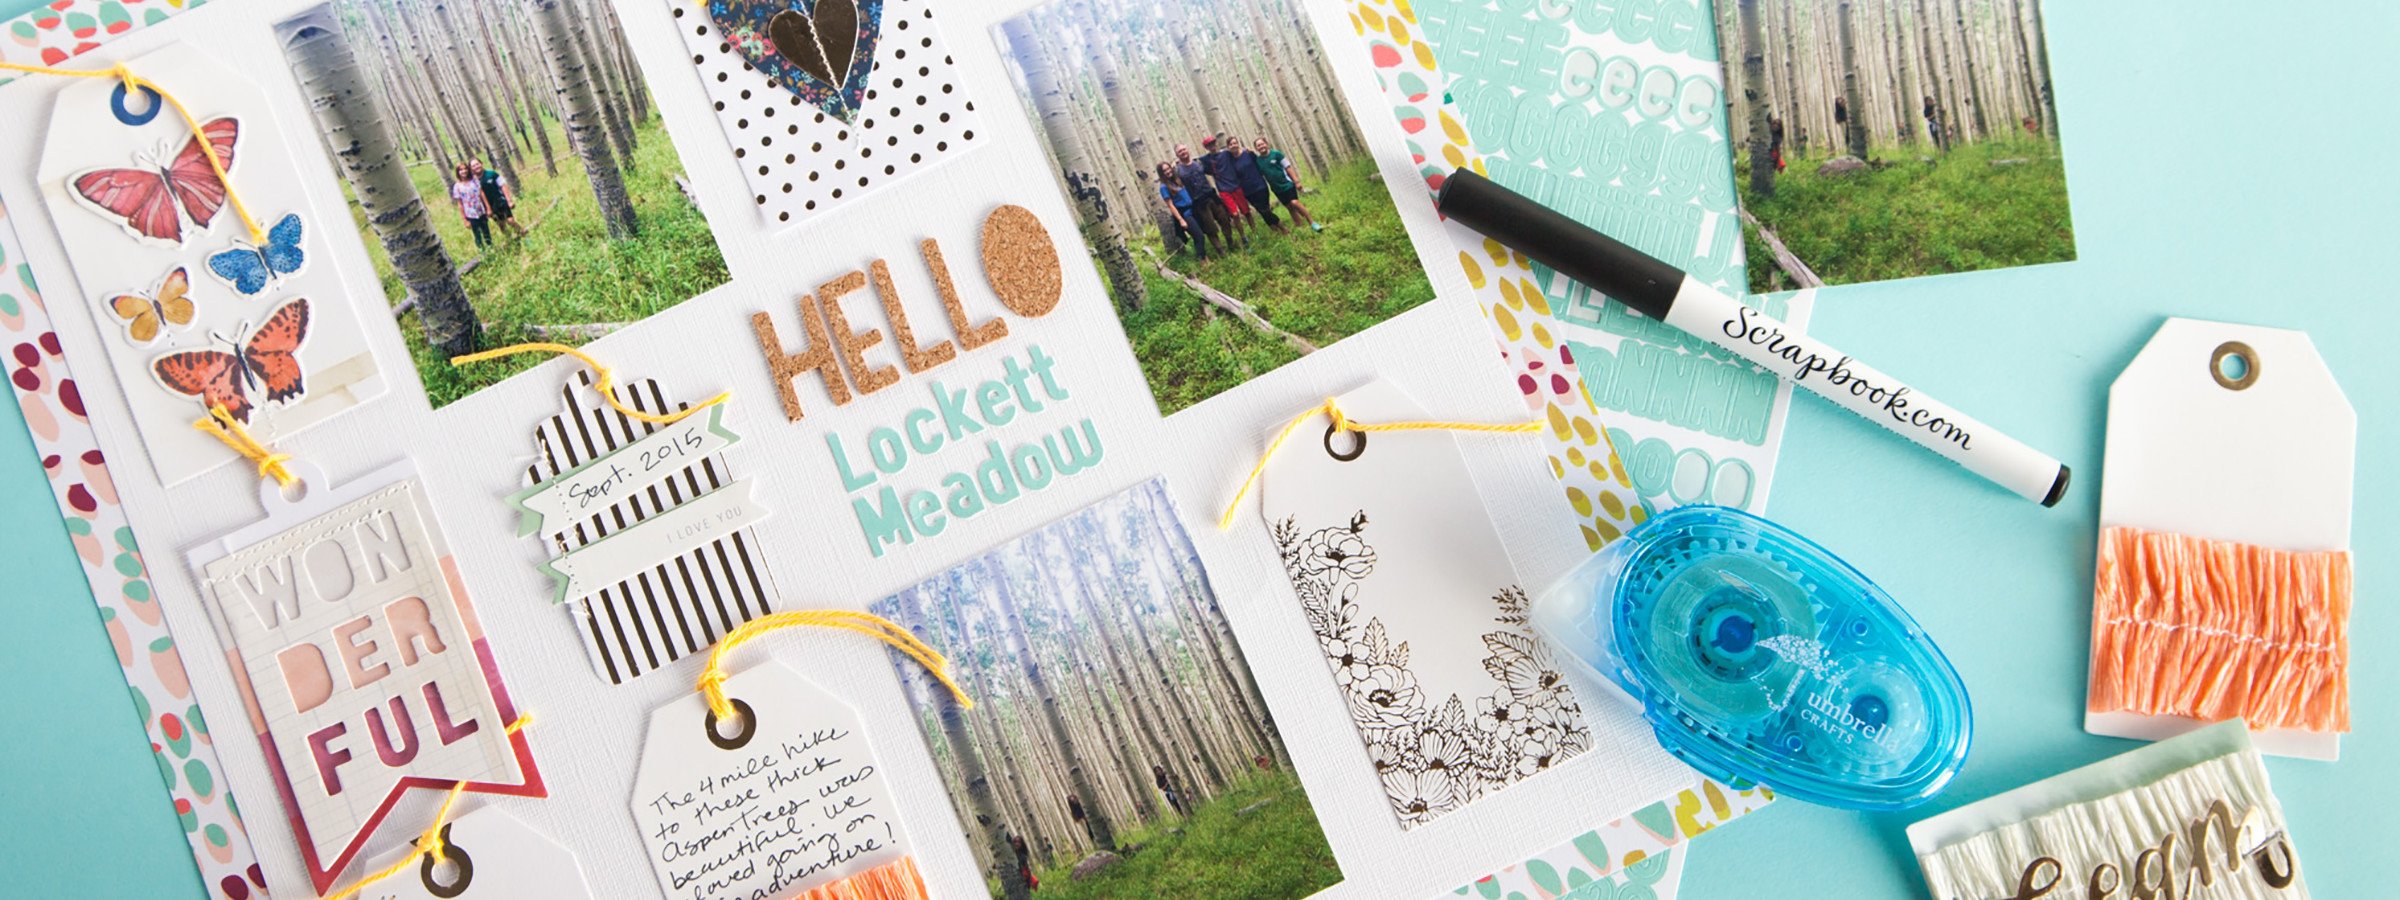 Creating an Intricate Scrapbook Page Is Easier than You Think